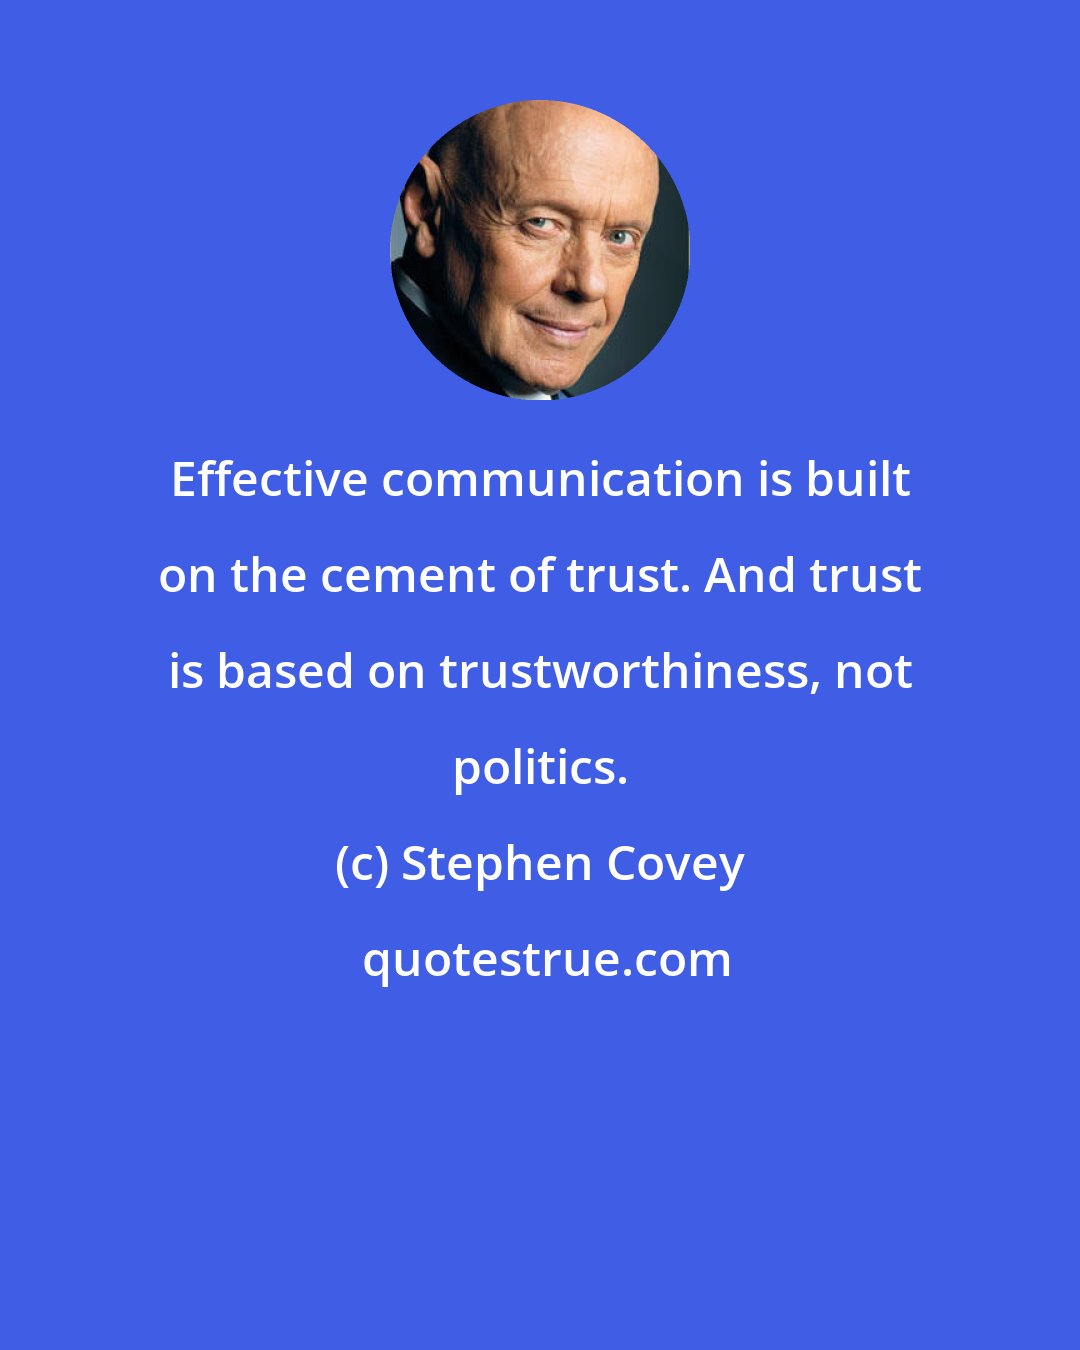 Stephen Covey: Effective communication is built on the cement of trust. And trust is based on trustworthiness, not politics.